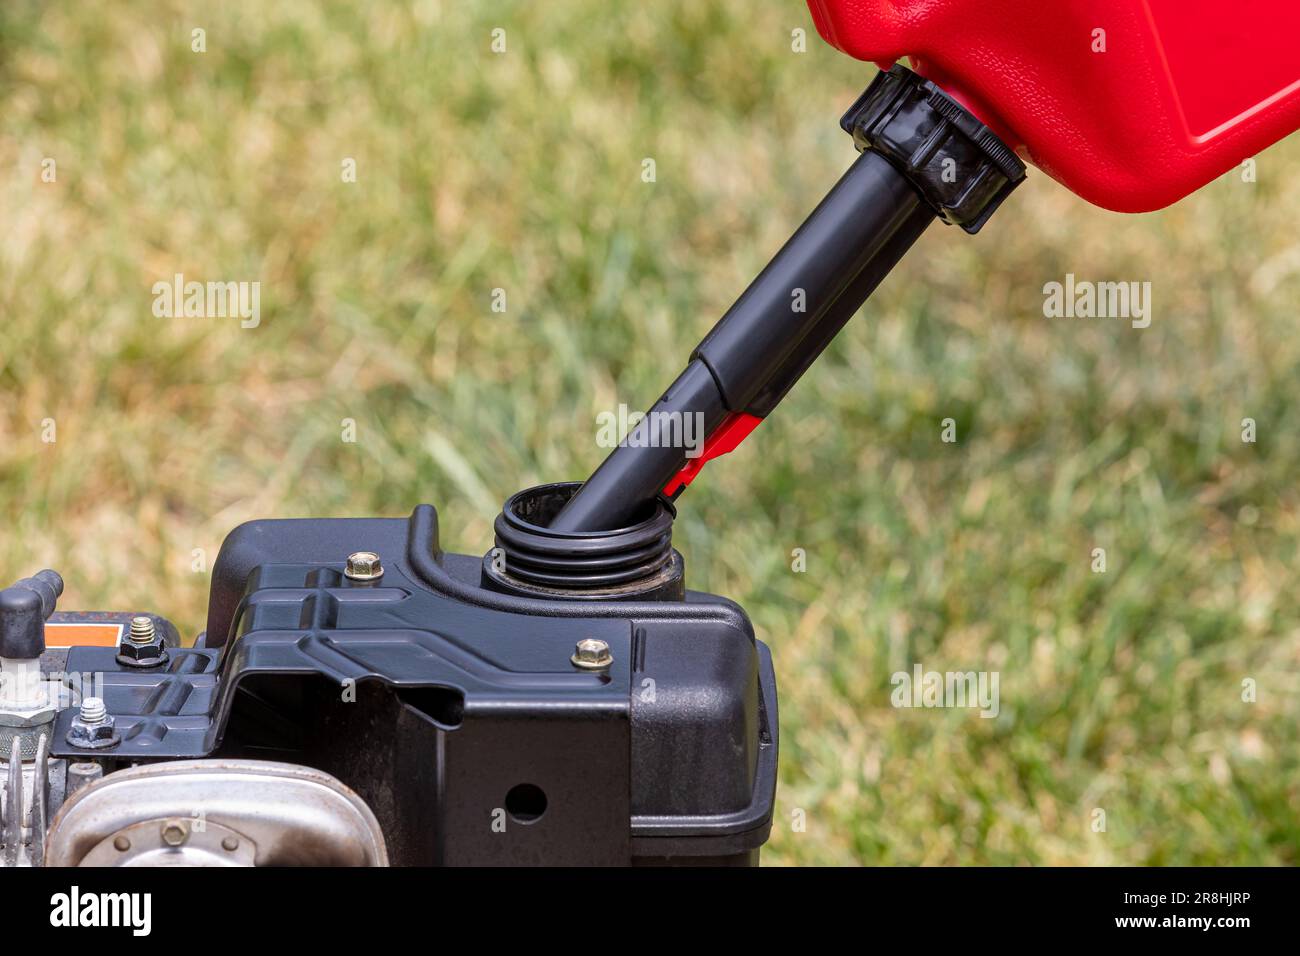 Gas can pouring gasoline into fuel tank of lawnmower. Lawn equipment maintenance, service and safety concept. Stock Photo